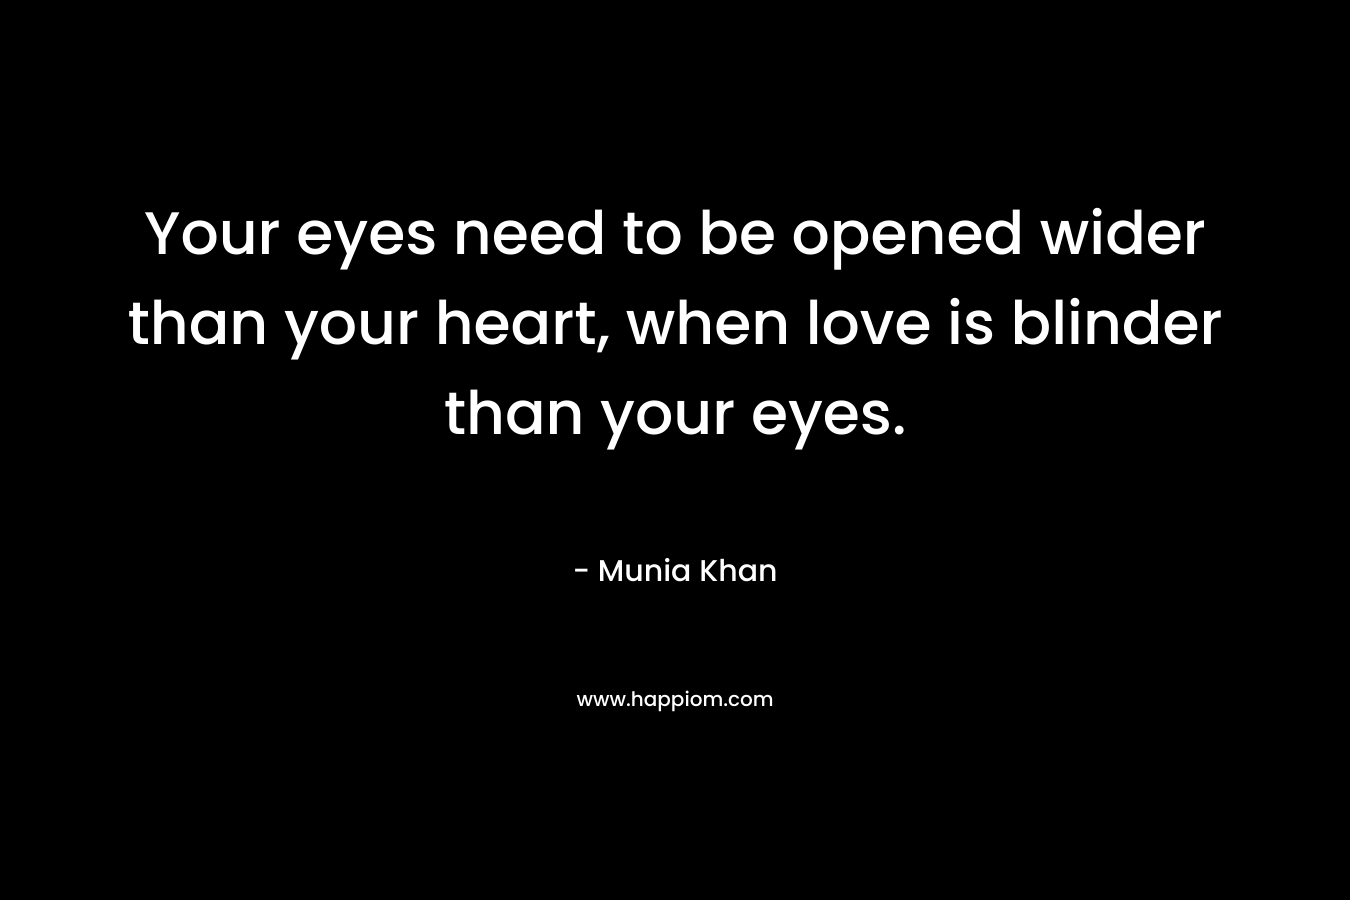 Your eyes need to be opened wider than your heart, when love is blinder than your eyes.